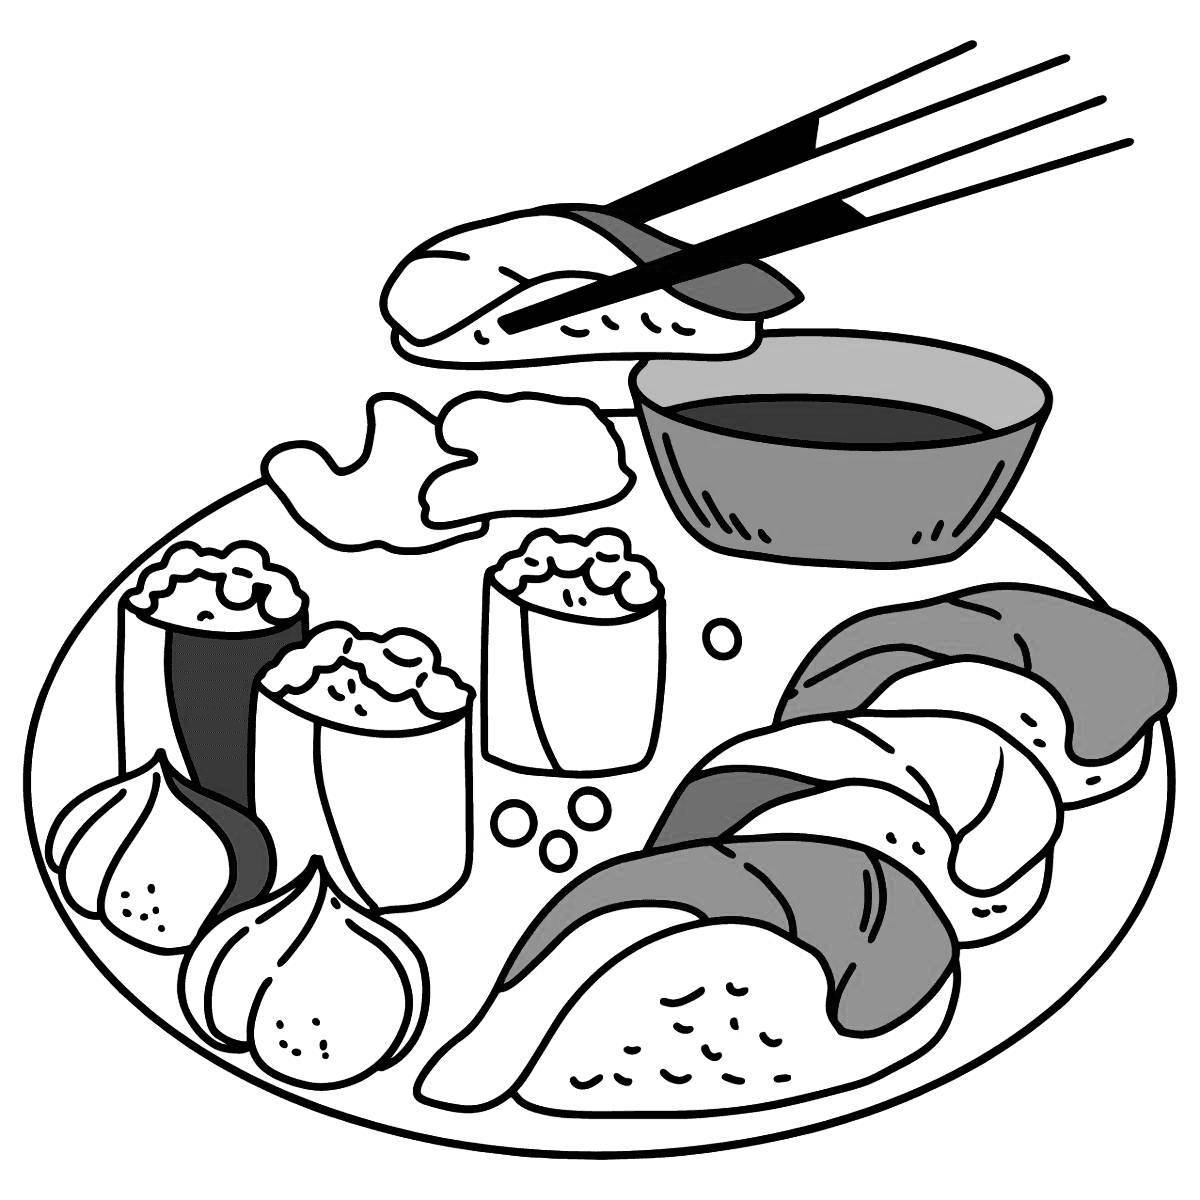 Colorful sushi coloring page